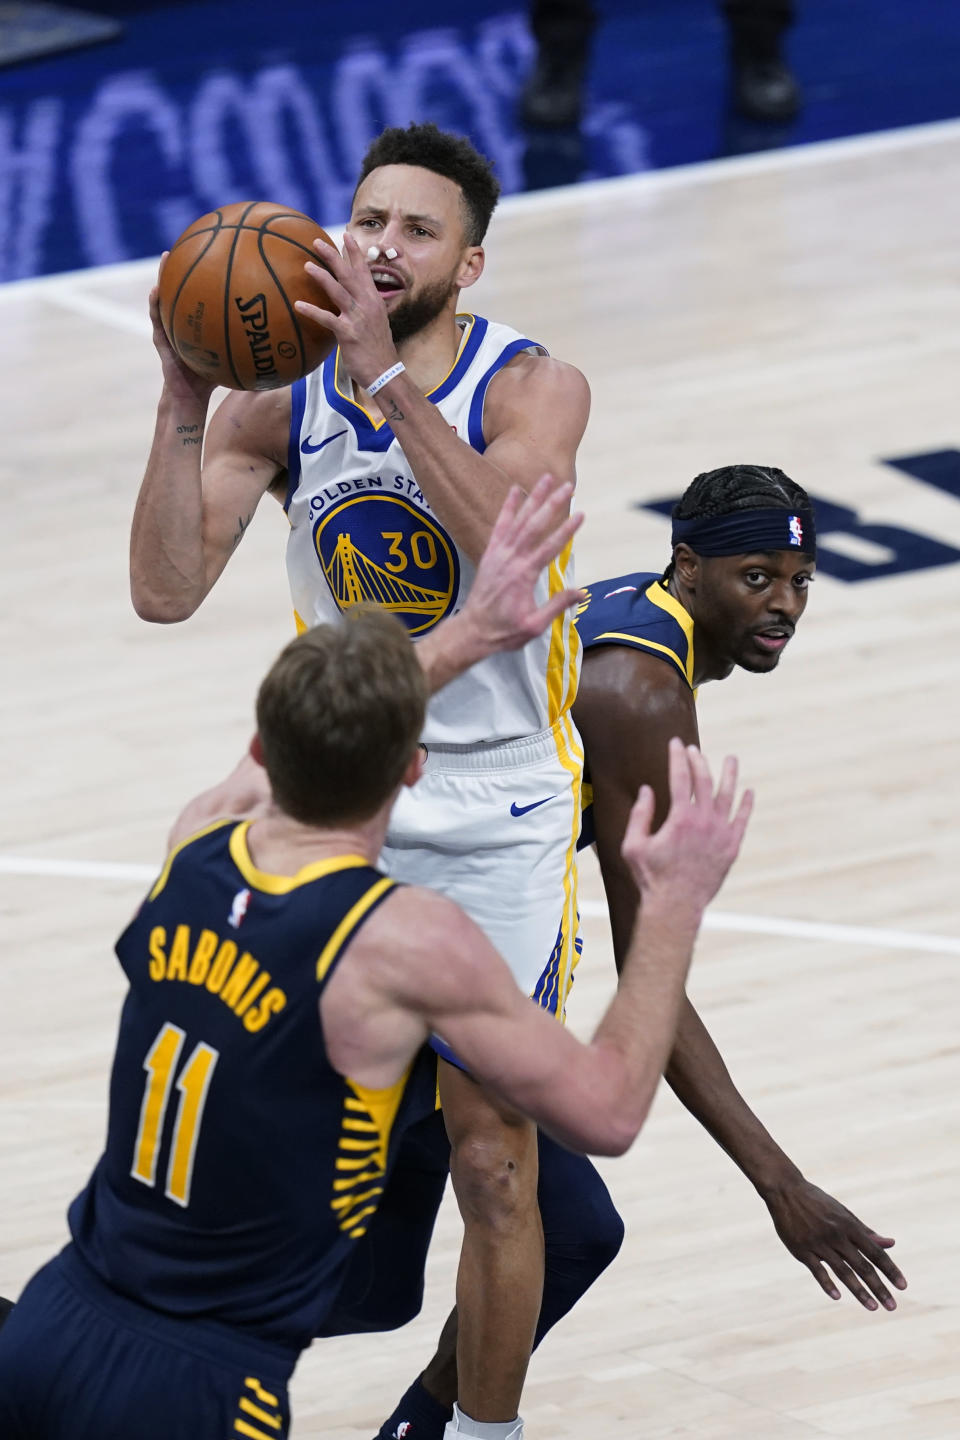 Golden State Warriors' Stephen Curry (30) shoots from between Indiana Pacers' Justin Holiday, right, and Domantas Sabonis during the second half of an NBA basketball game Wednesday, Feb. 24, 2021, in Indianapolis. (AP Photo/Darron Cummings)